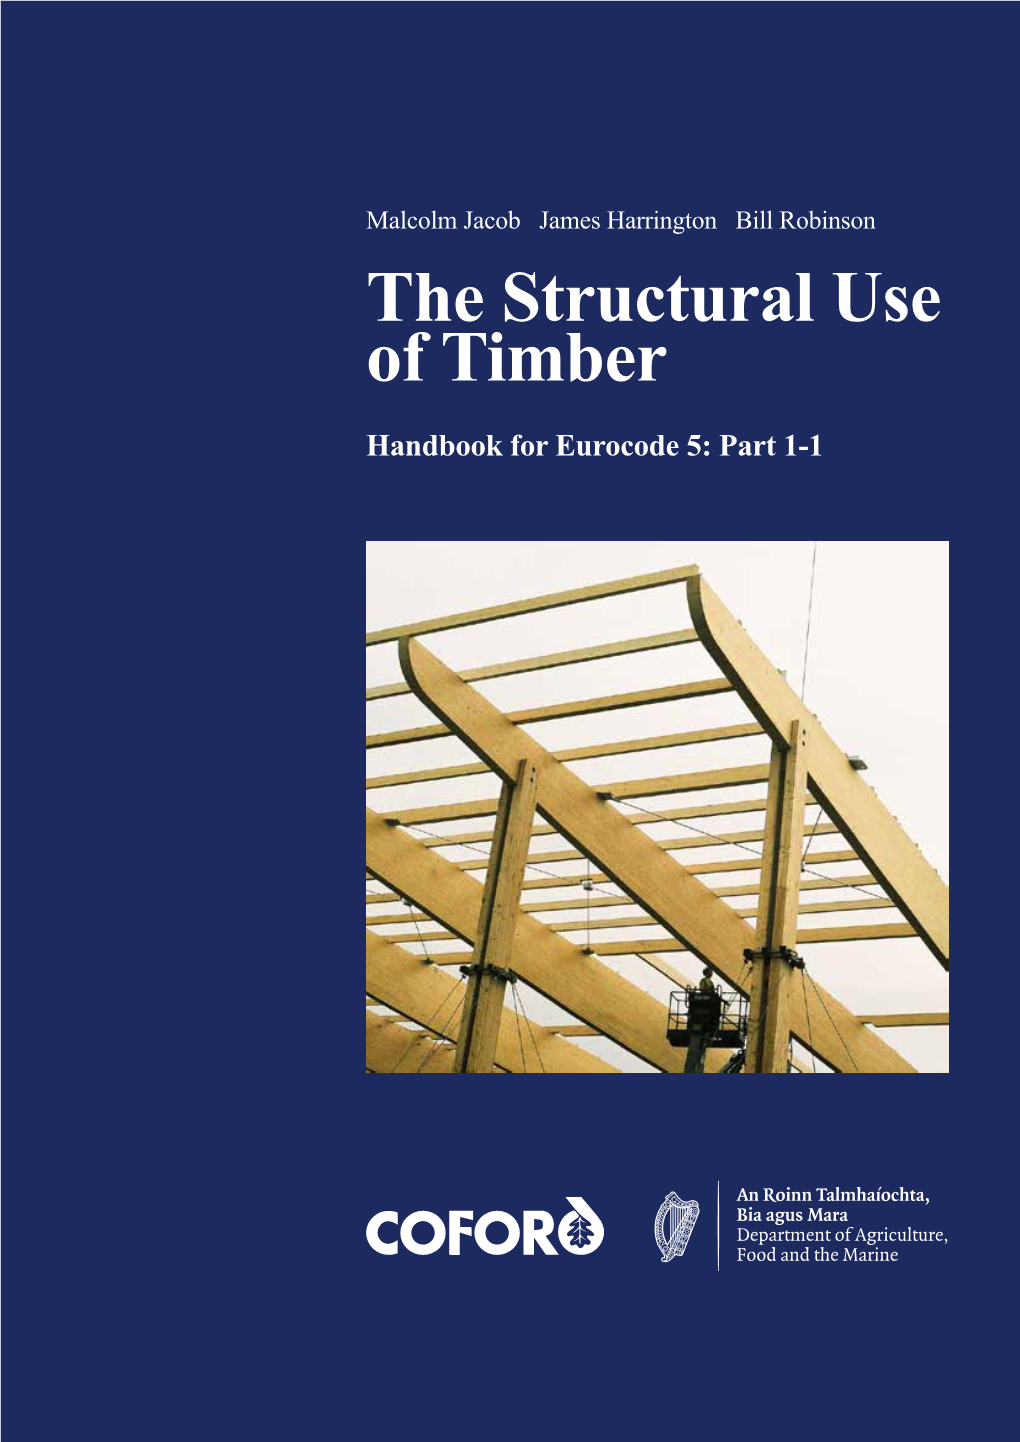 The Structural Use of Timber